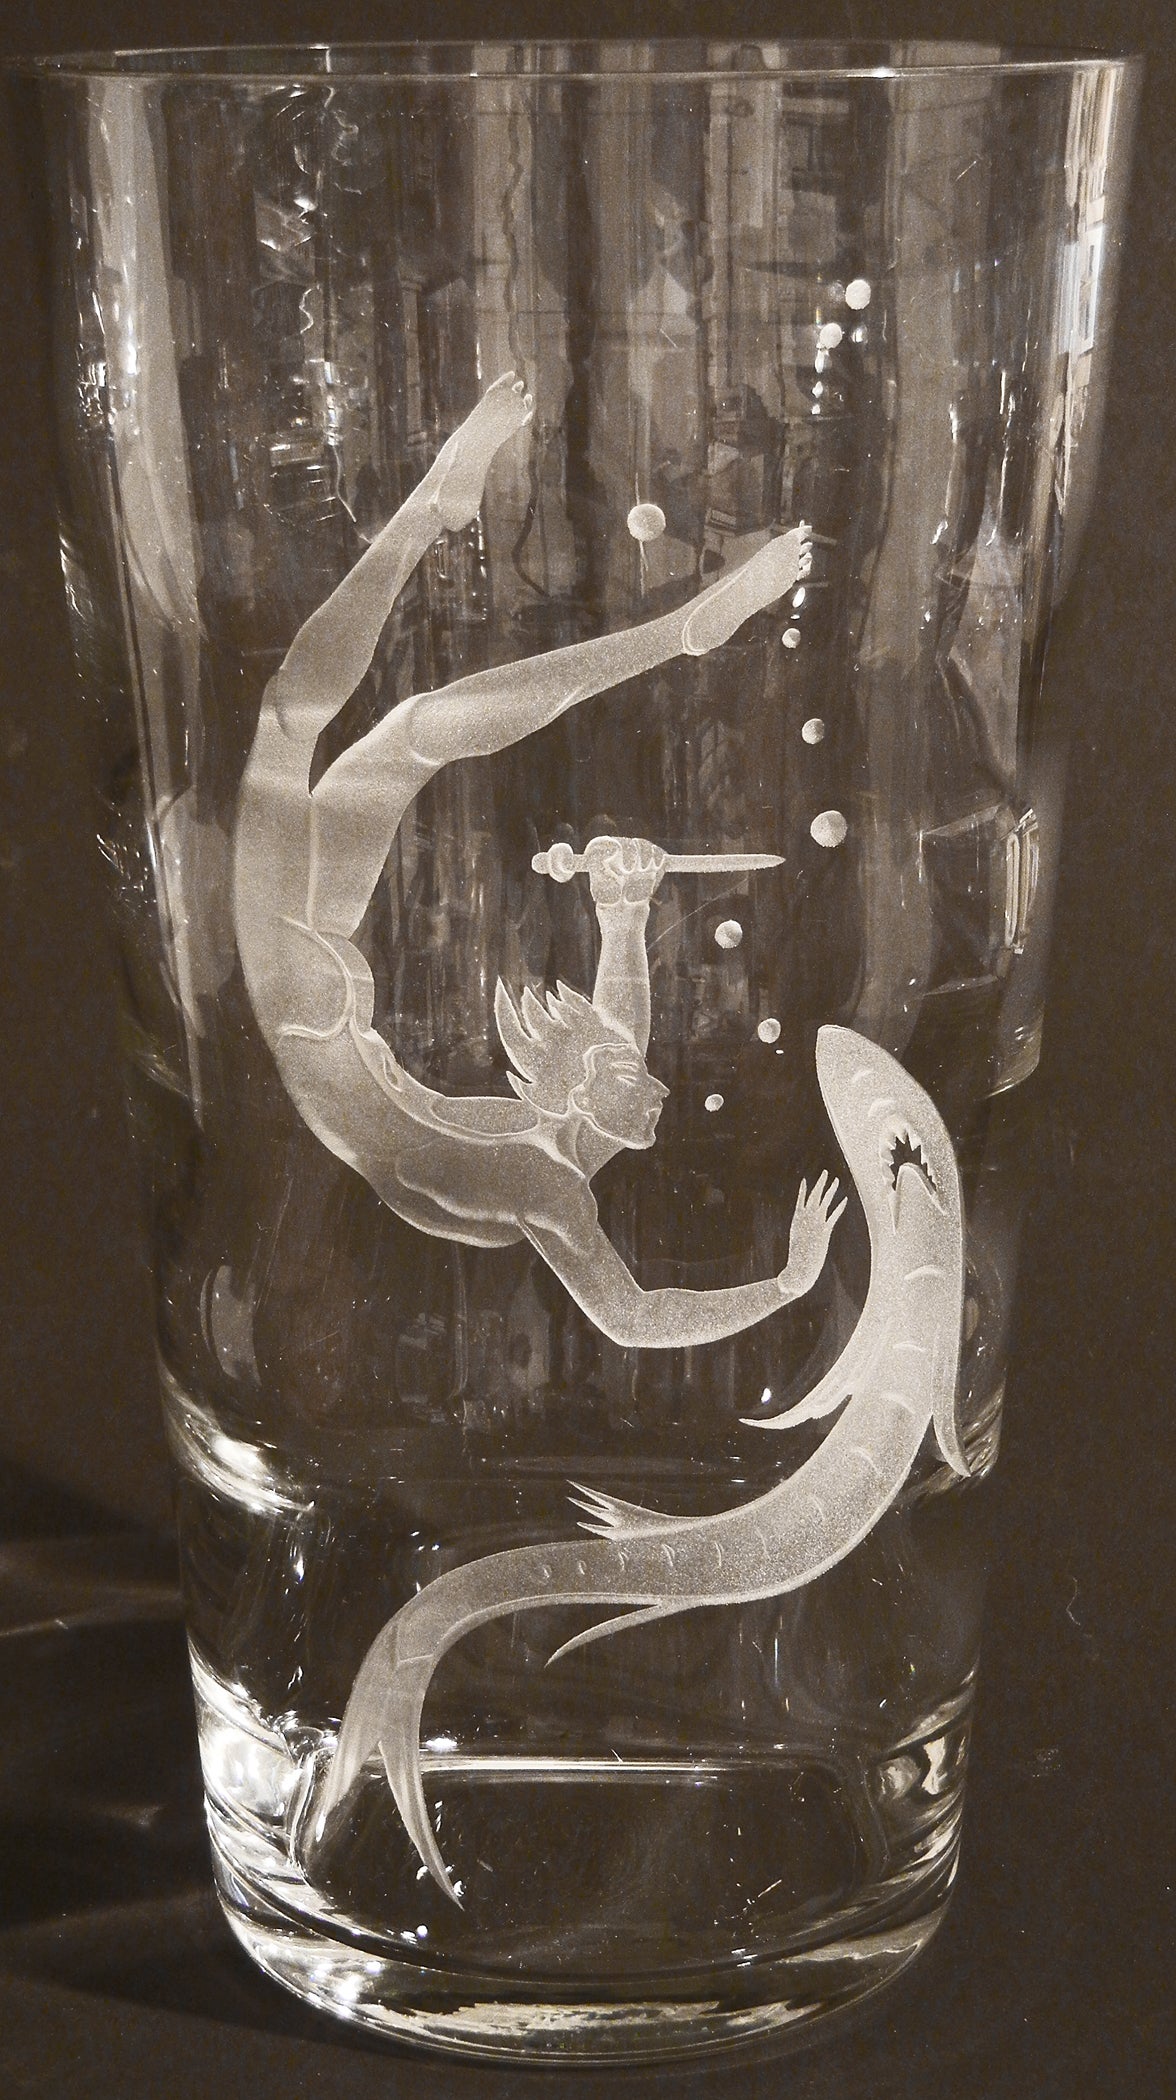 Extremely Rare, Large "Nude Diver and Shark" Art Deco Vase